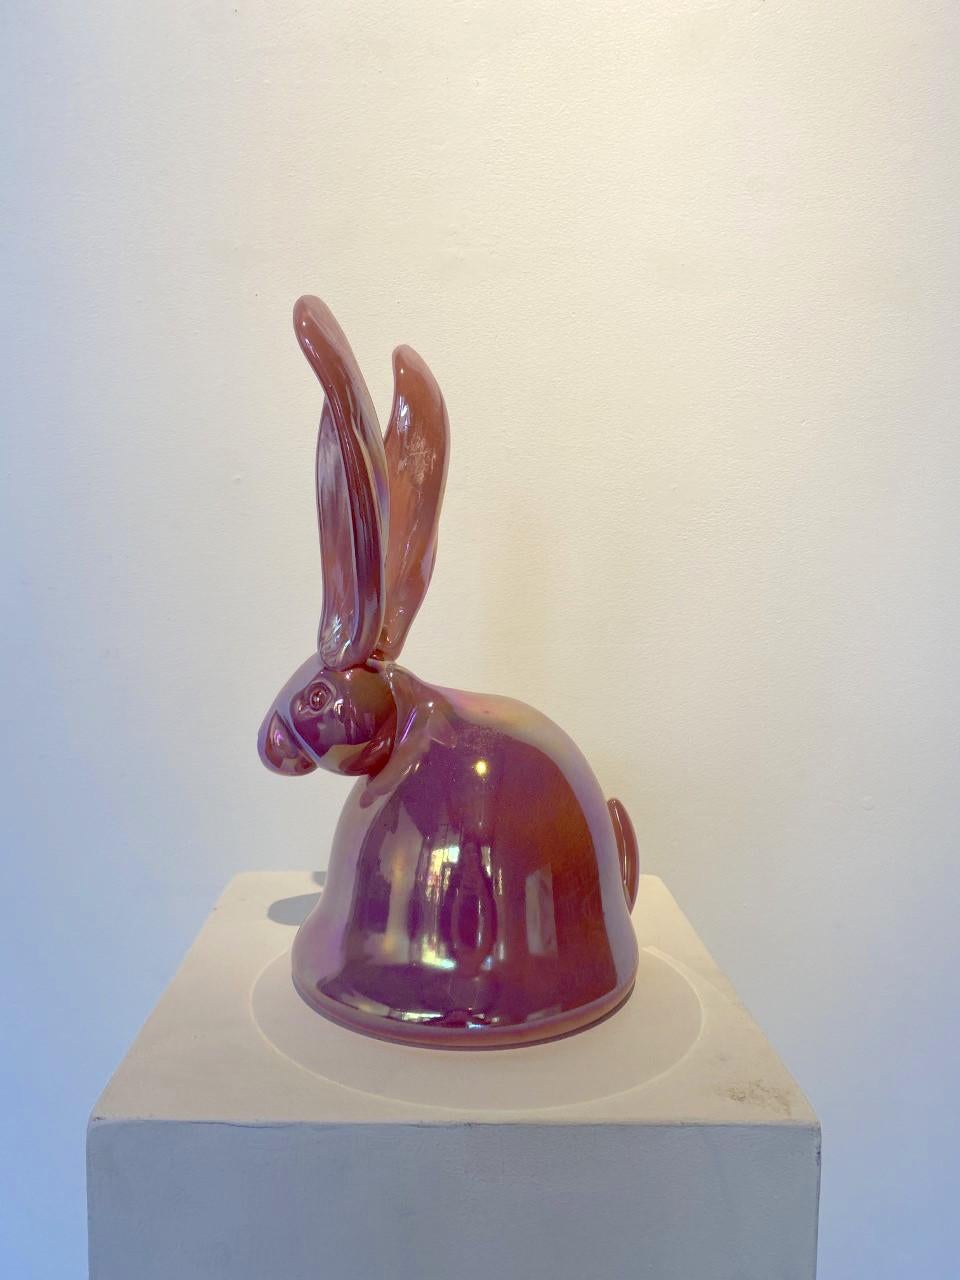 Blush Pink Bunny - Contemporary Sculpture by Hunt Slonem